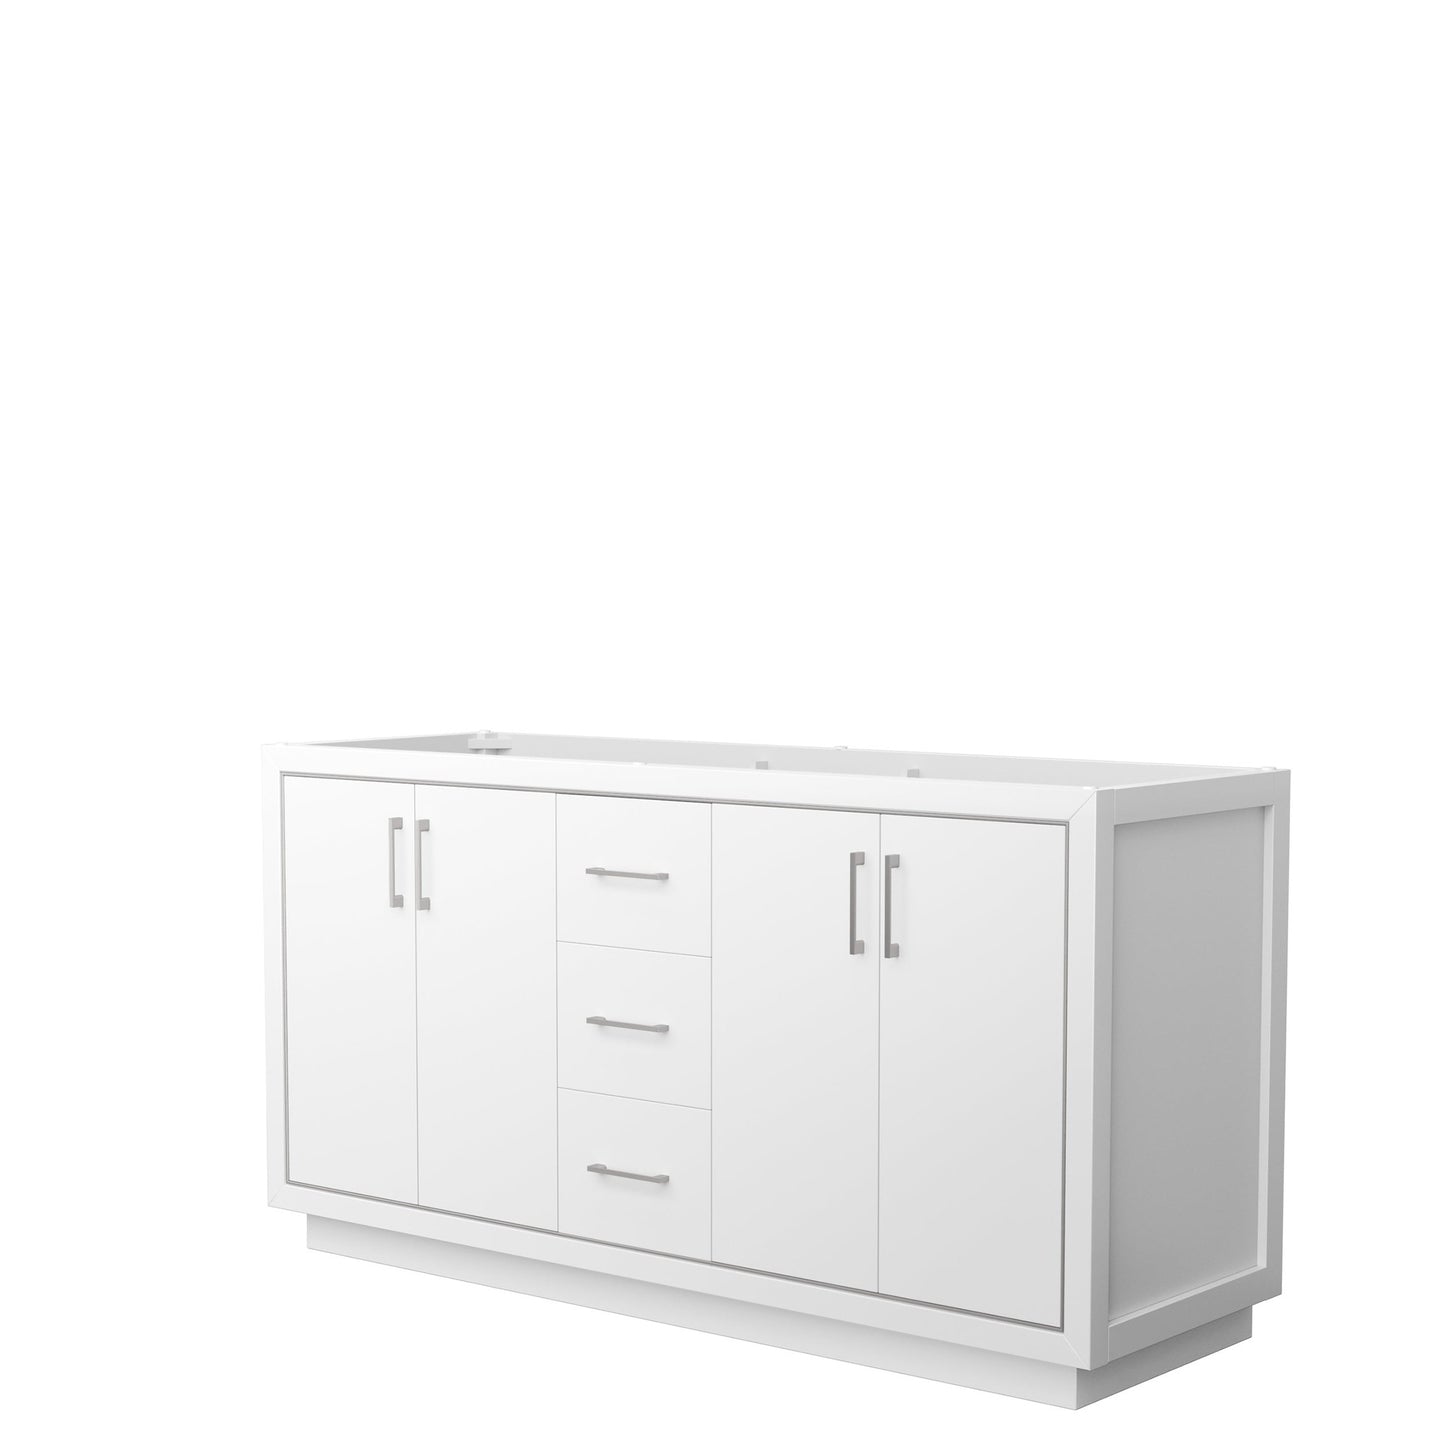 Wyndham Collection Icon 66" Double Bathroom Vanity in White, No Countertop, No Sink, Brushed Nickel Trim